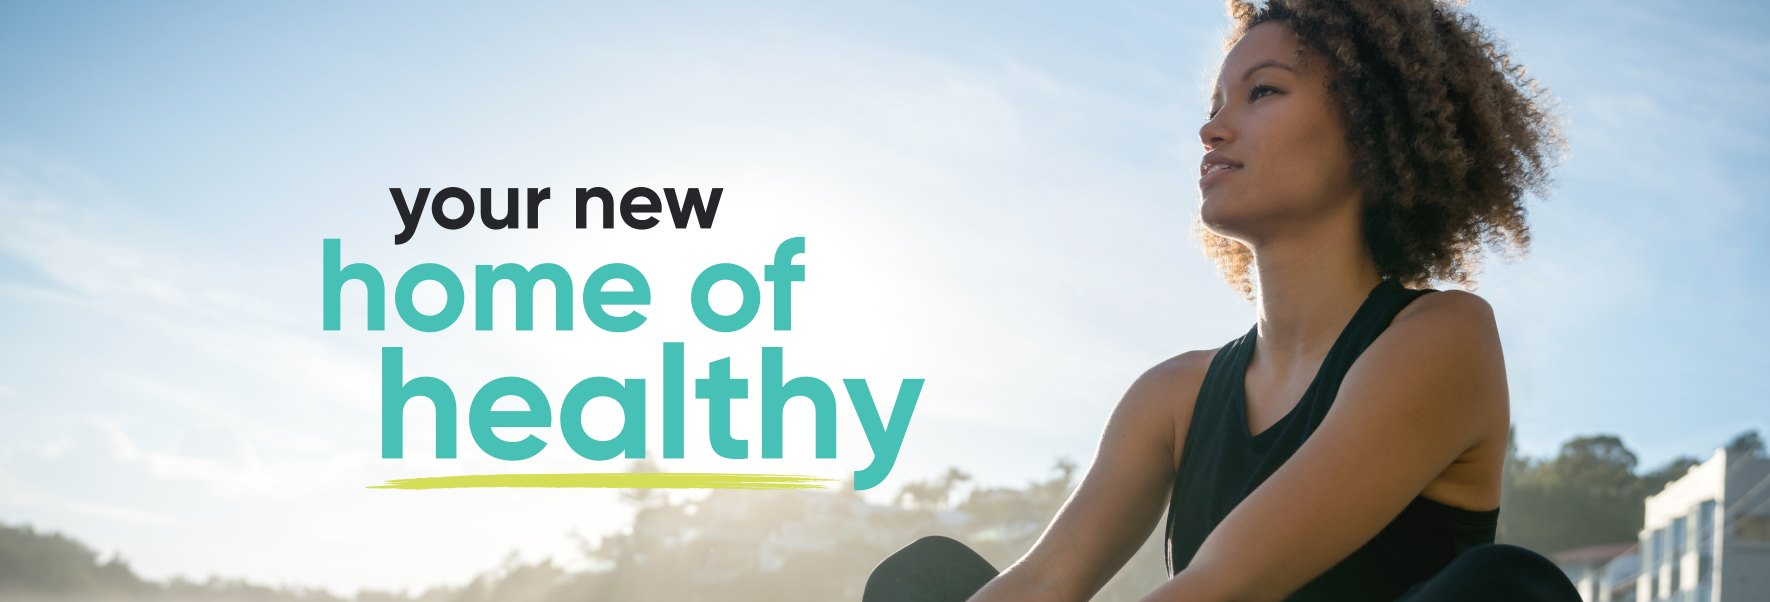 $10 OFF $70 when you sign up at Healthylife